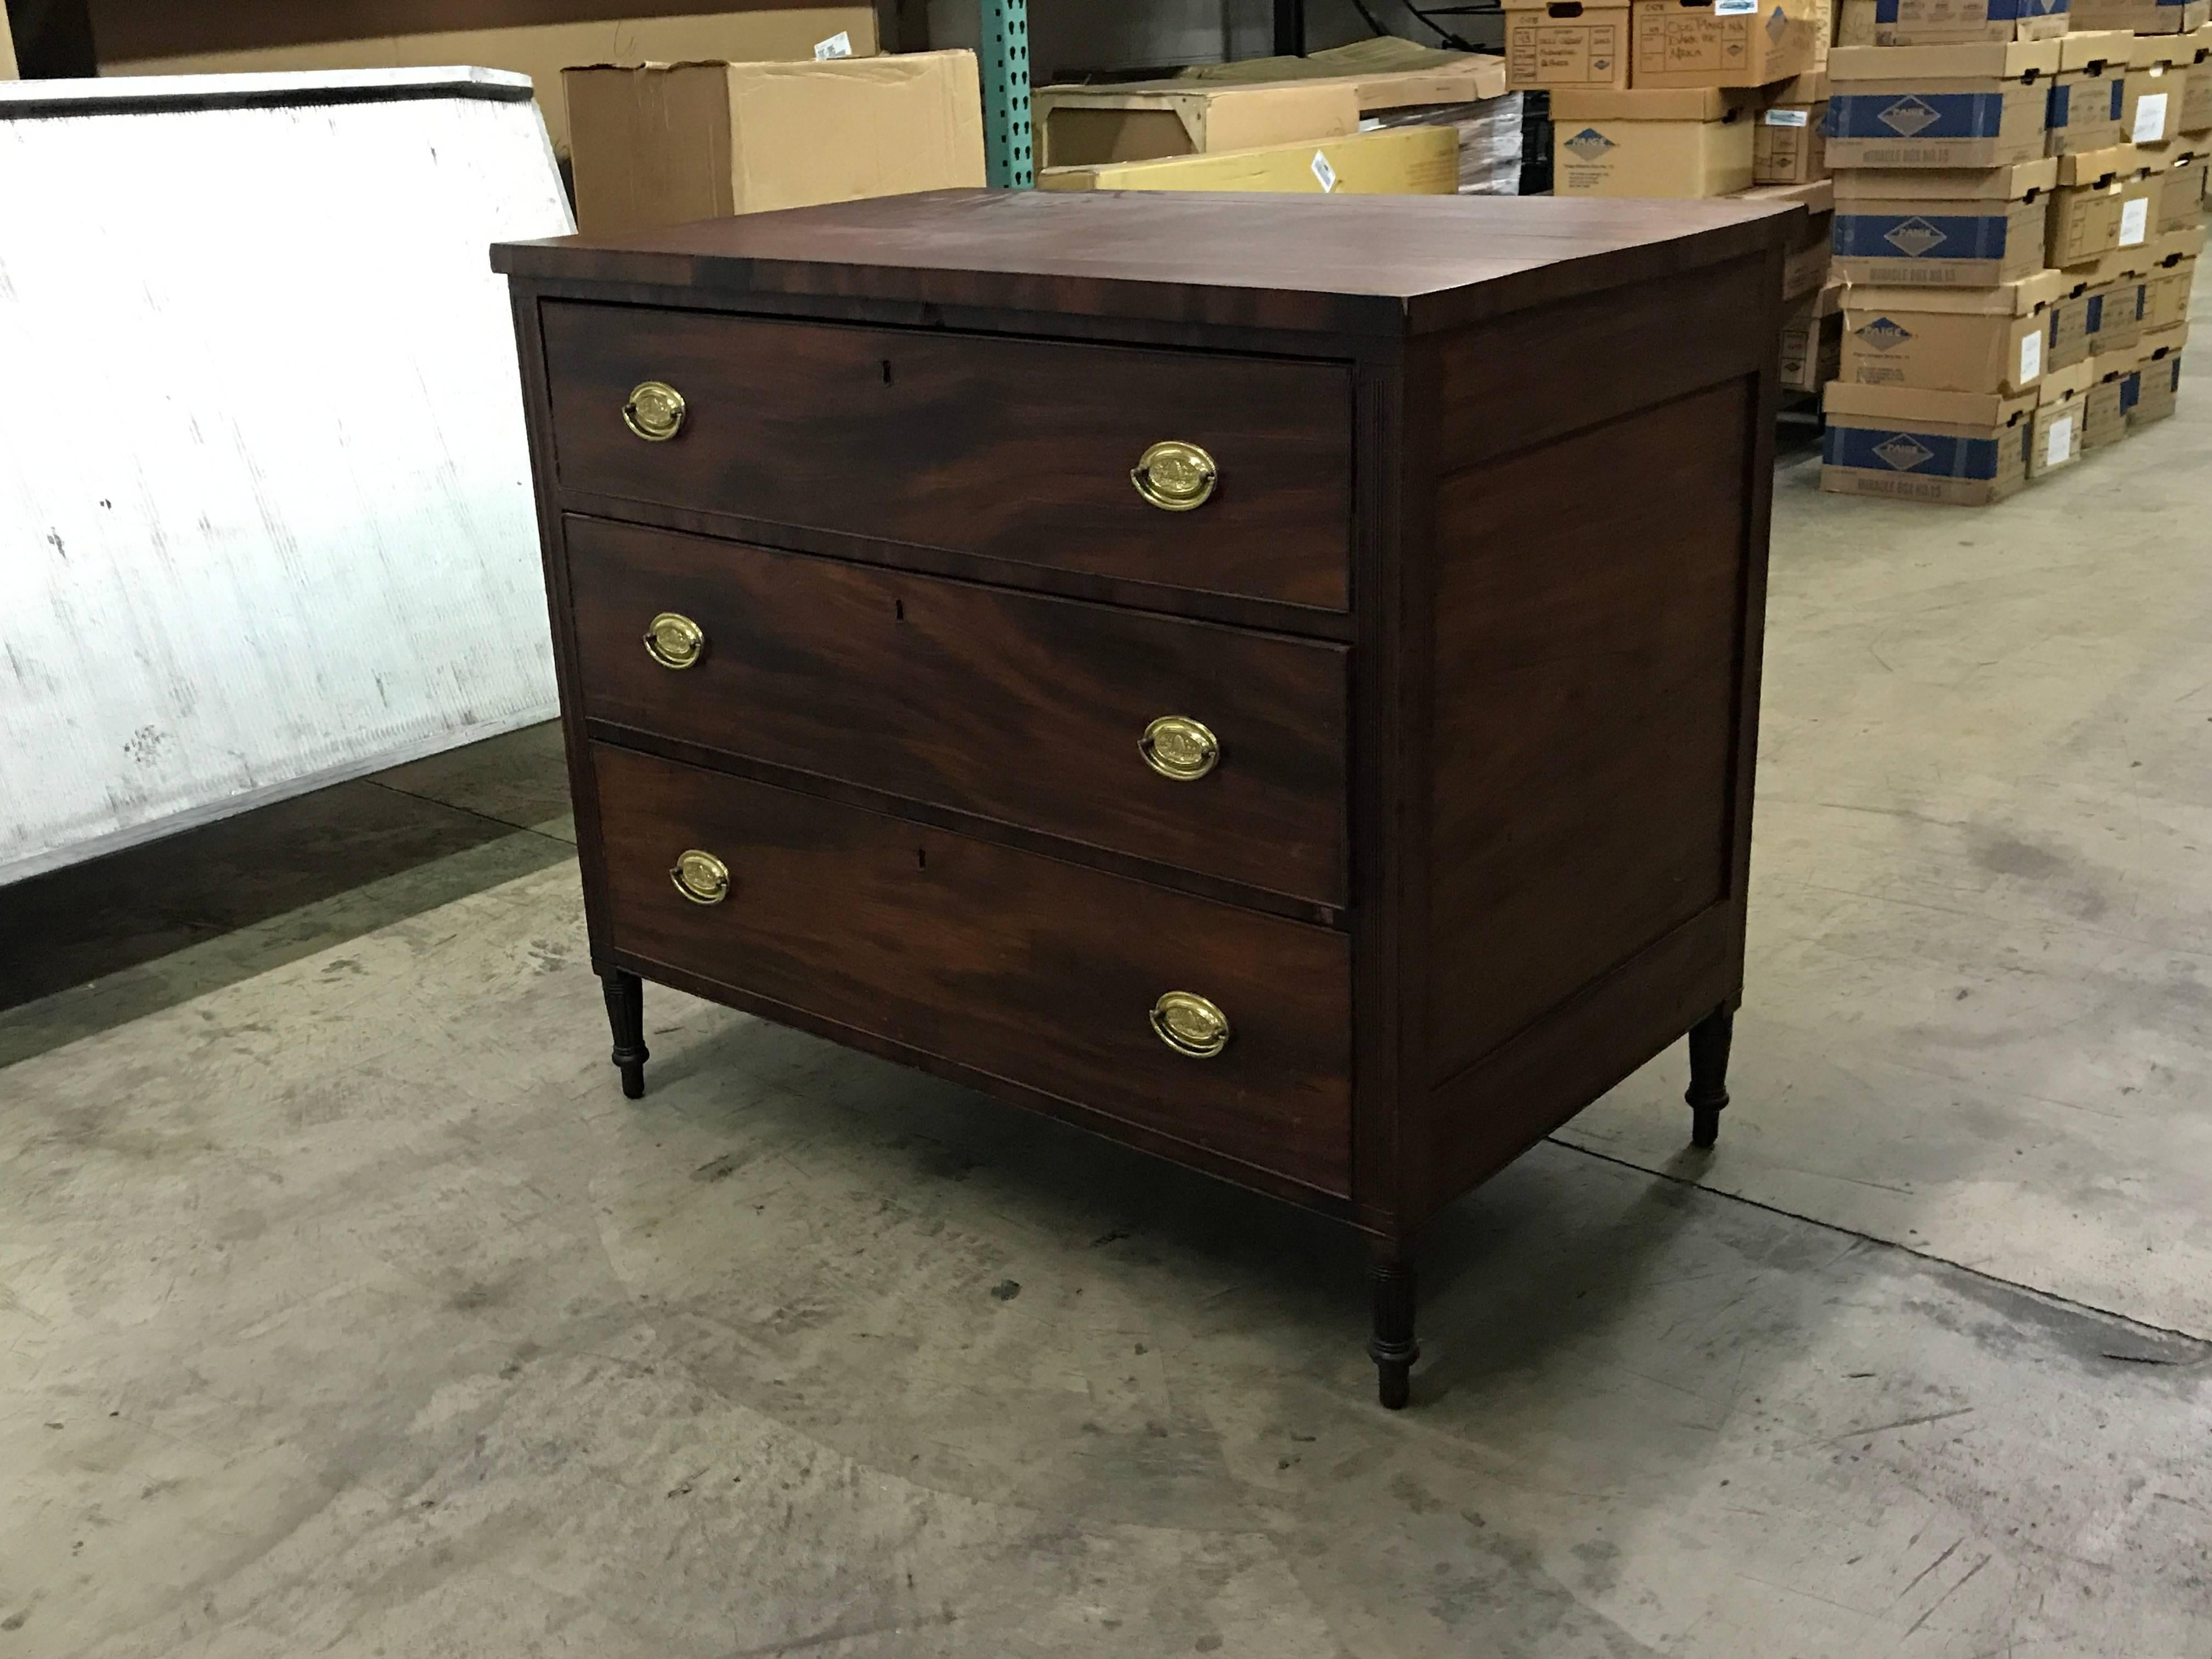 Offered is an exquisite, late 18th century English-Georgian mahogany chest with three graduated drawers, finished with original brass plates and pulls. Dovetailed drawers. Does not include key. Extremely sturdy. 

Top drawer, 8". Middle